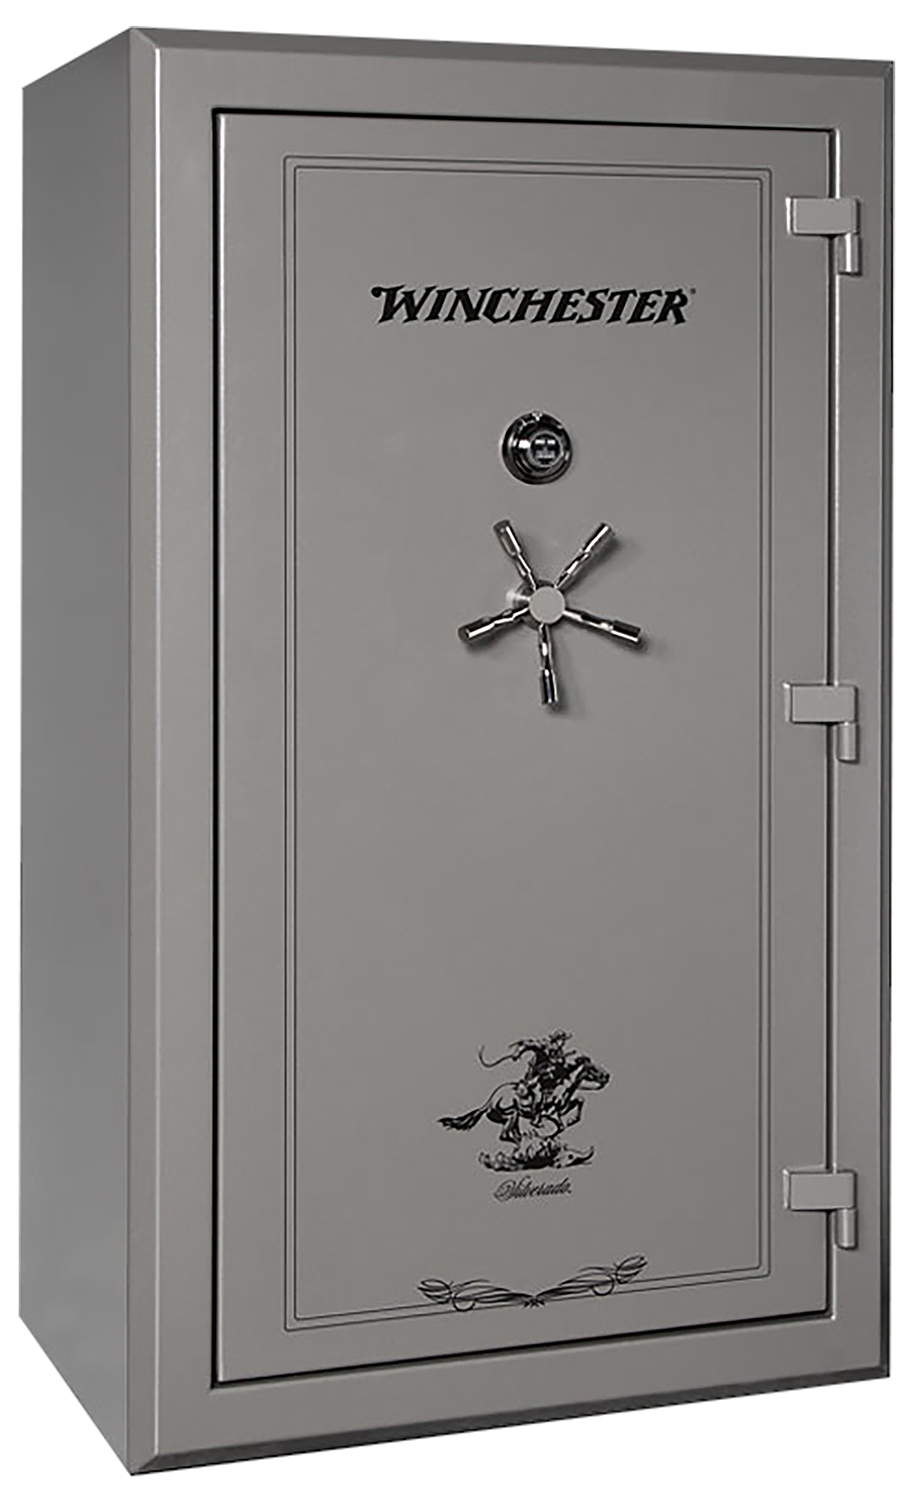 Winchester Safes  Silverado 51 Electronic Entry Gunmetal Powder Coat 10 Gauge Steel Holds Up to 48 Long Guns Fireproof- Yes